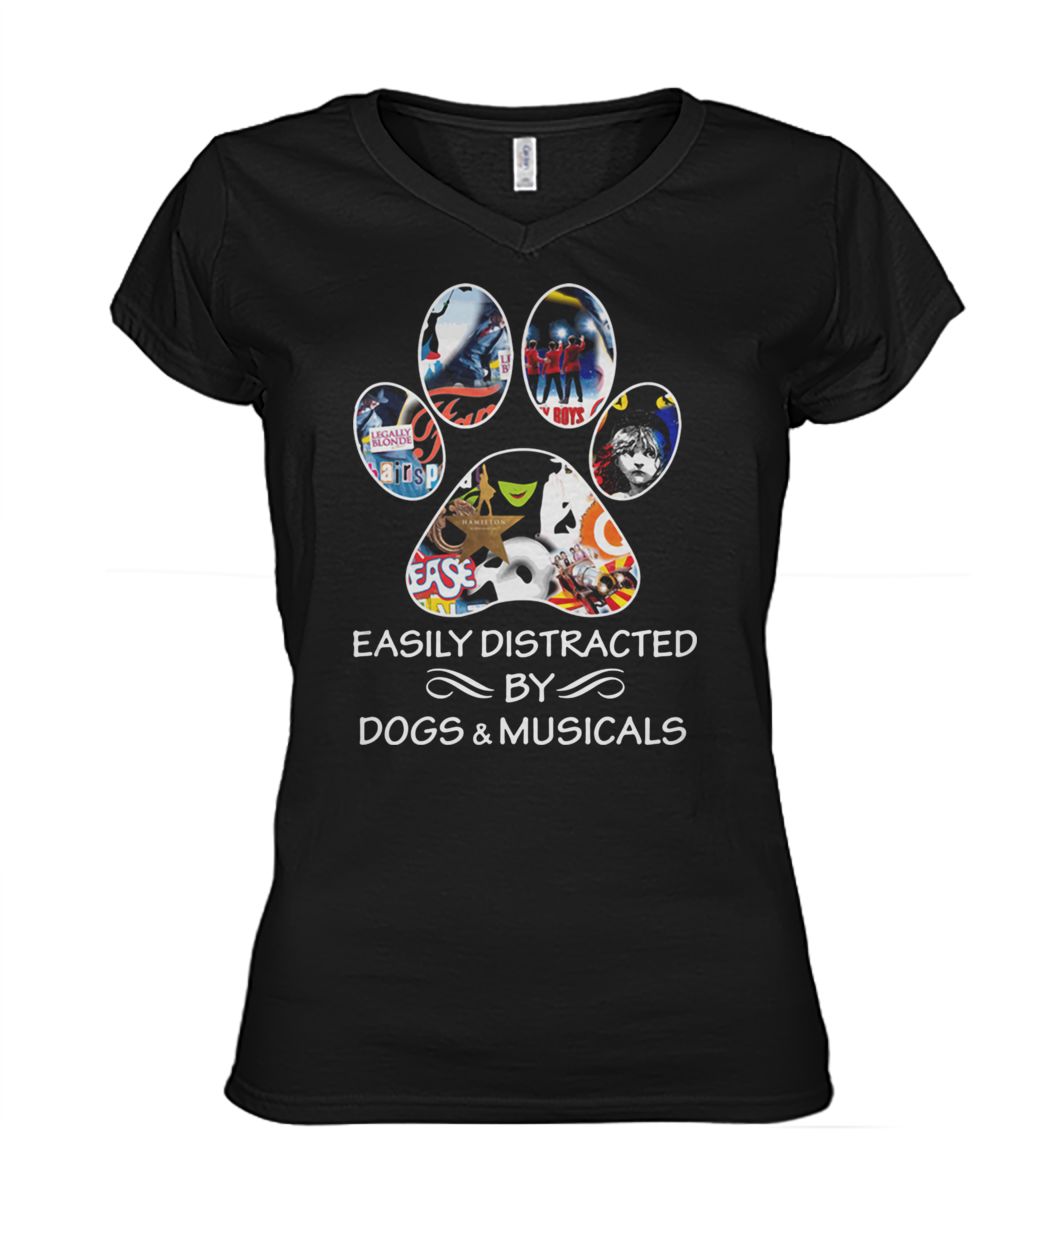 Broadway easily distracted by dogs and musicals women's v-neck